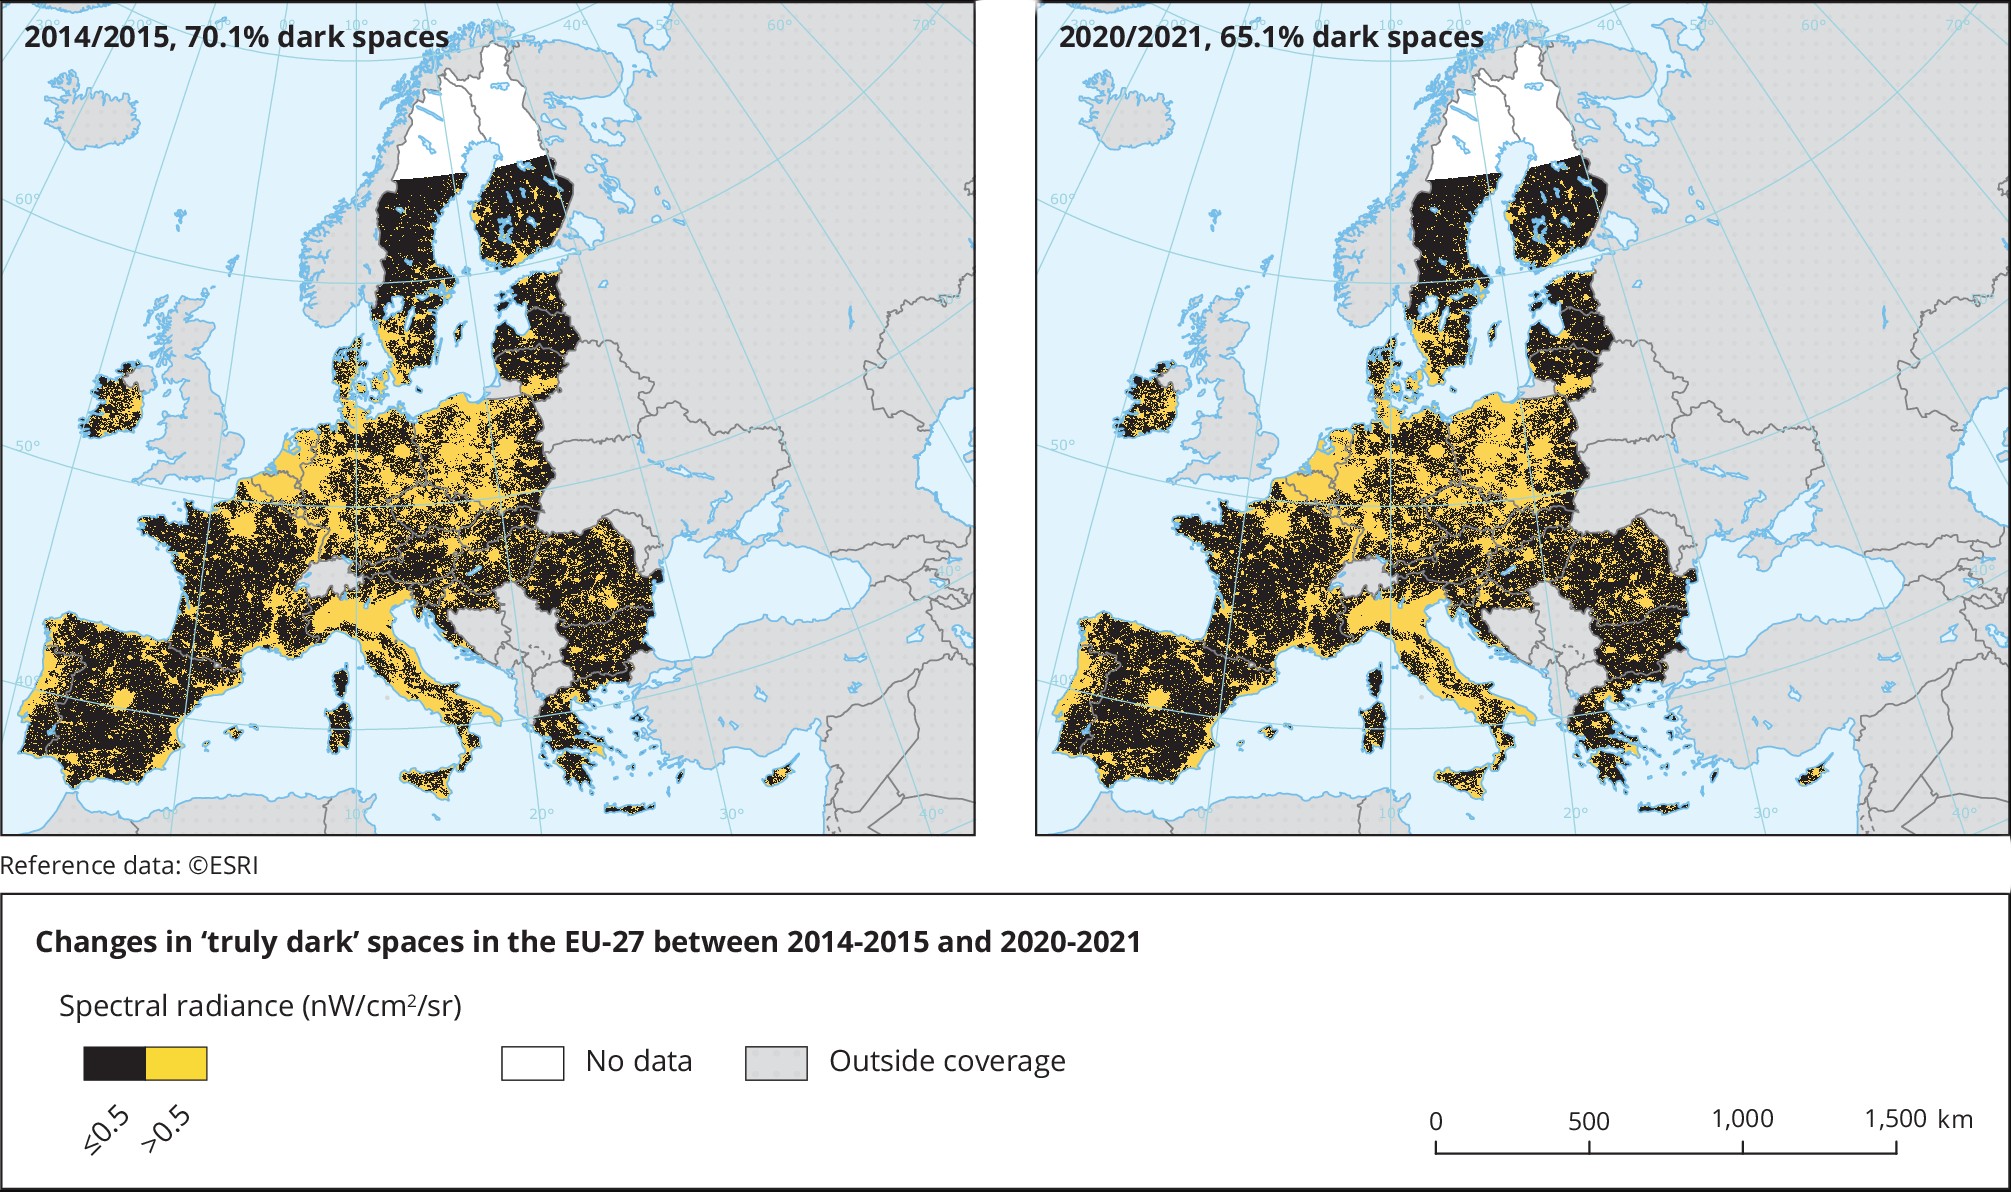 Map 1. Changes in ‘truly dark’ spaces in the EU-27 between 2014-2015 and 2020-2021